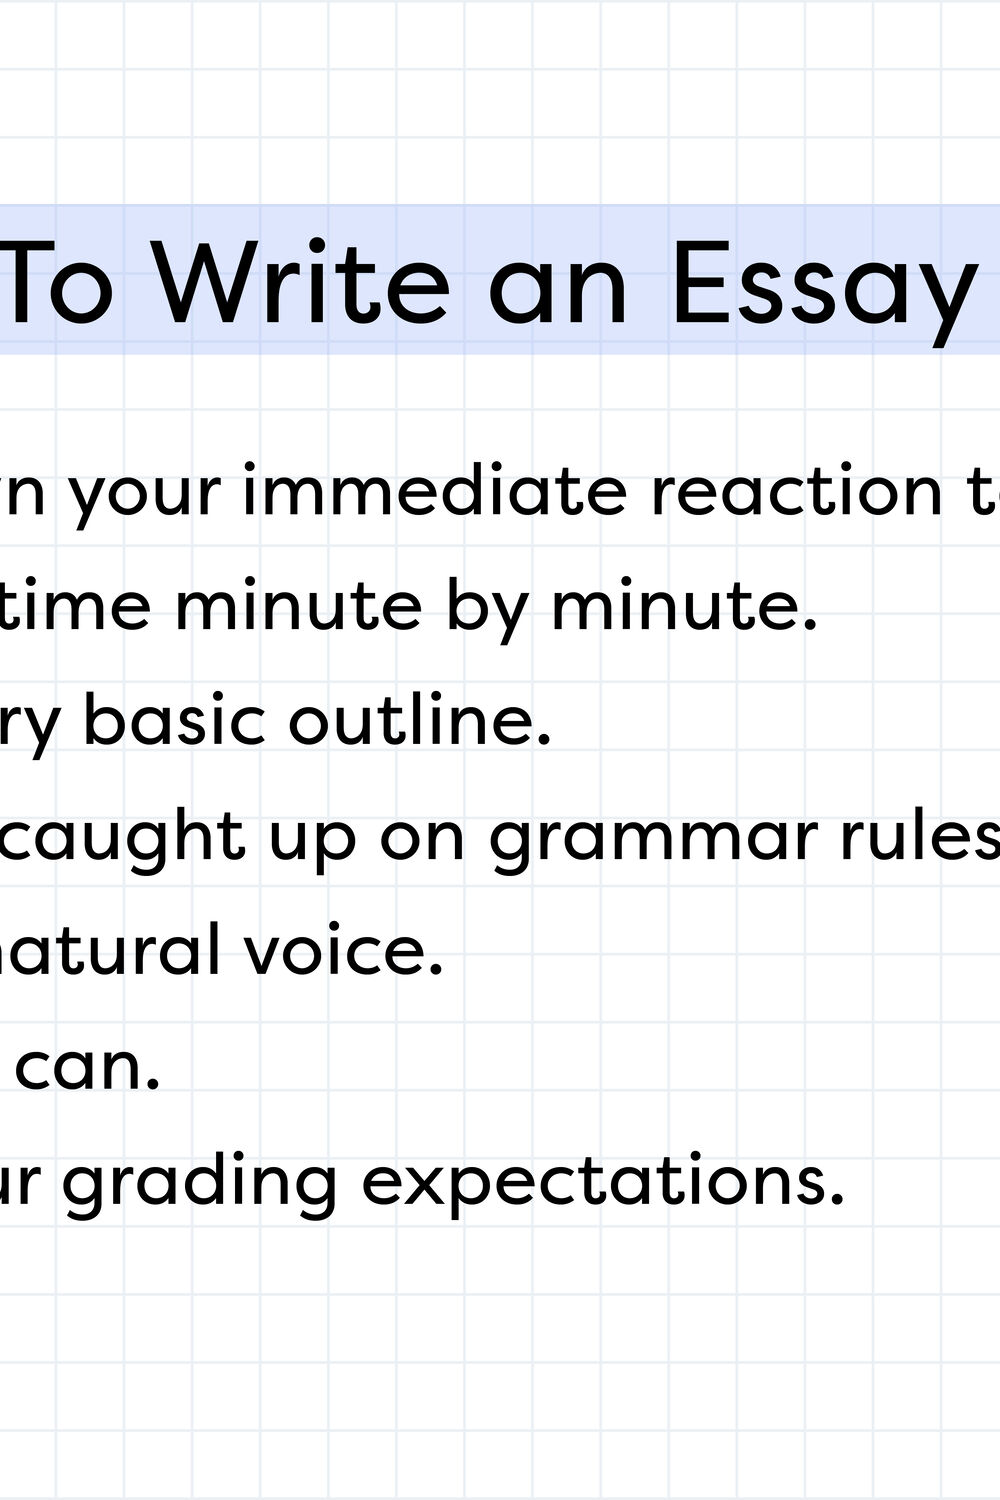 how to write an essay super fast